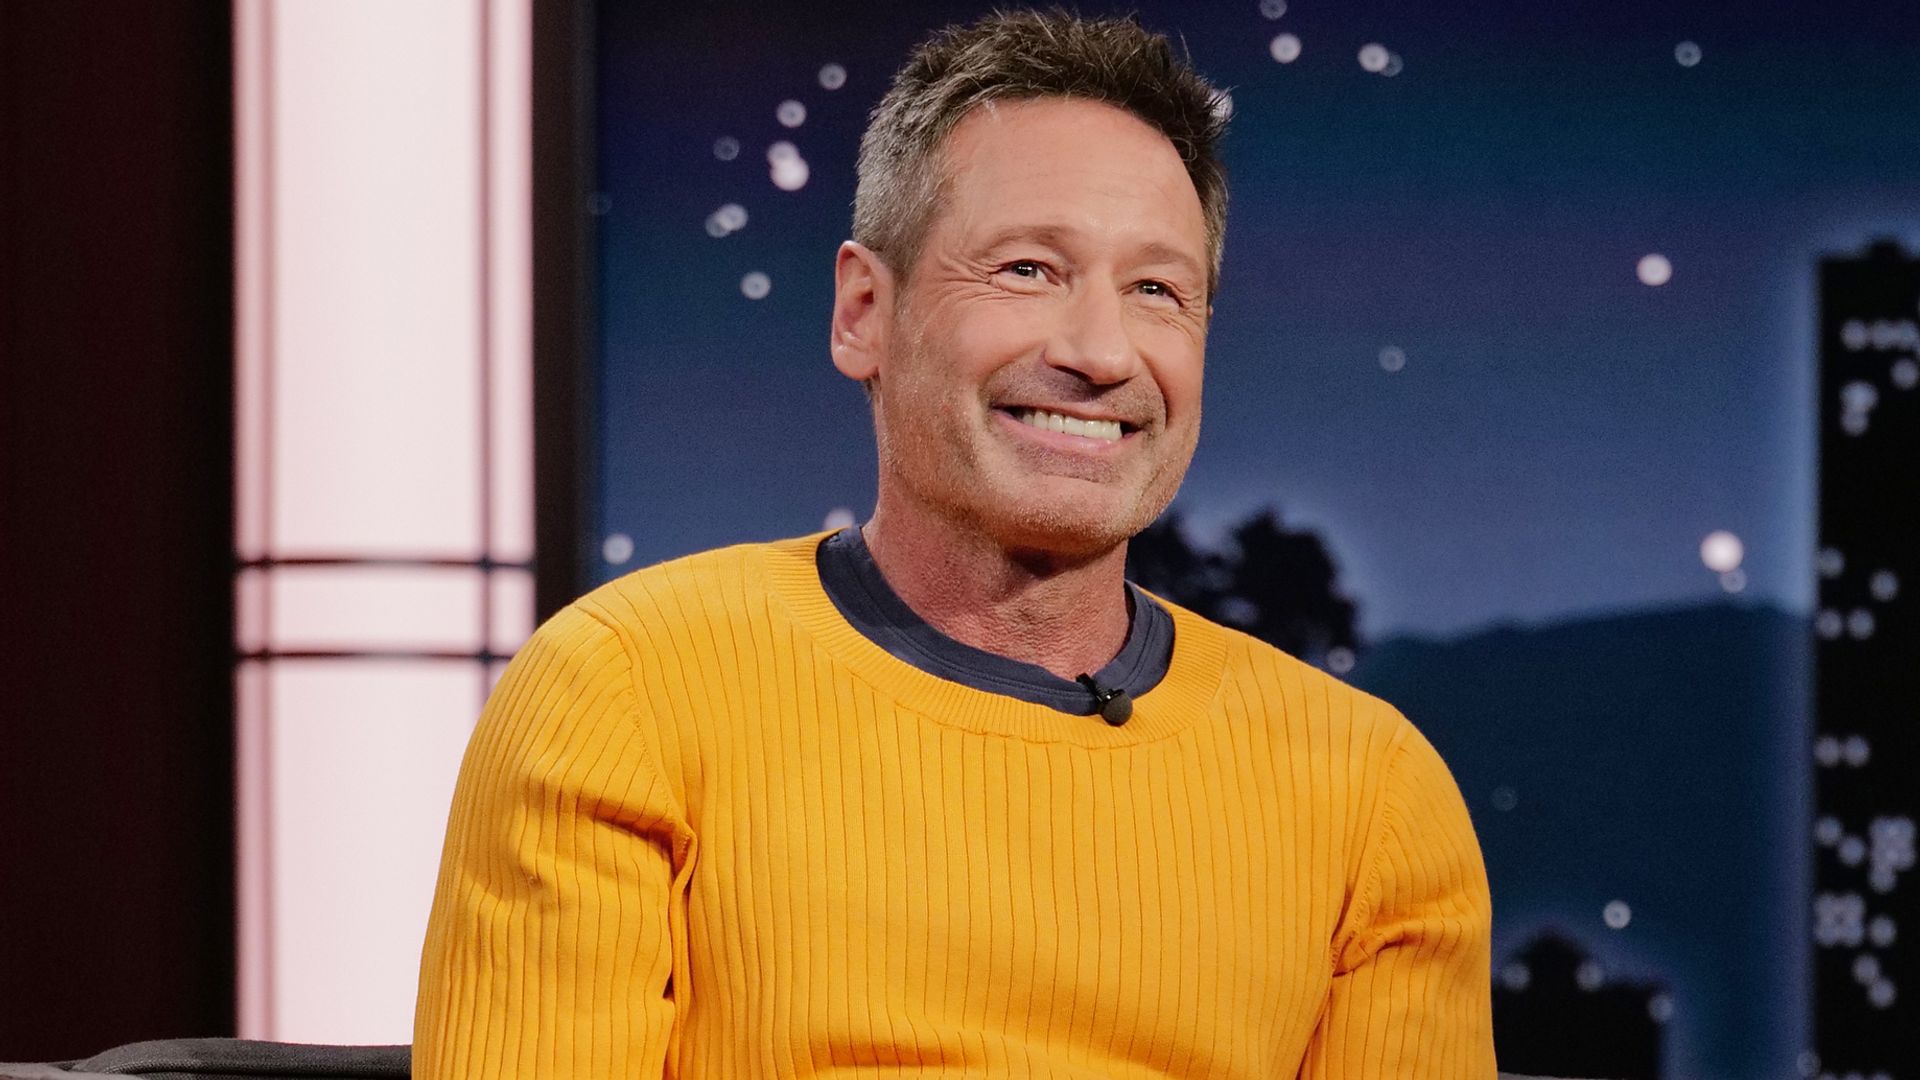 David Duchovny sat smiling while appearing on Jimmy Kimmel live in 2022